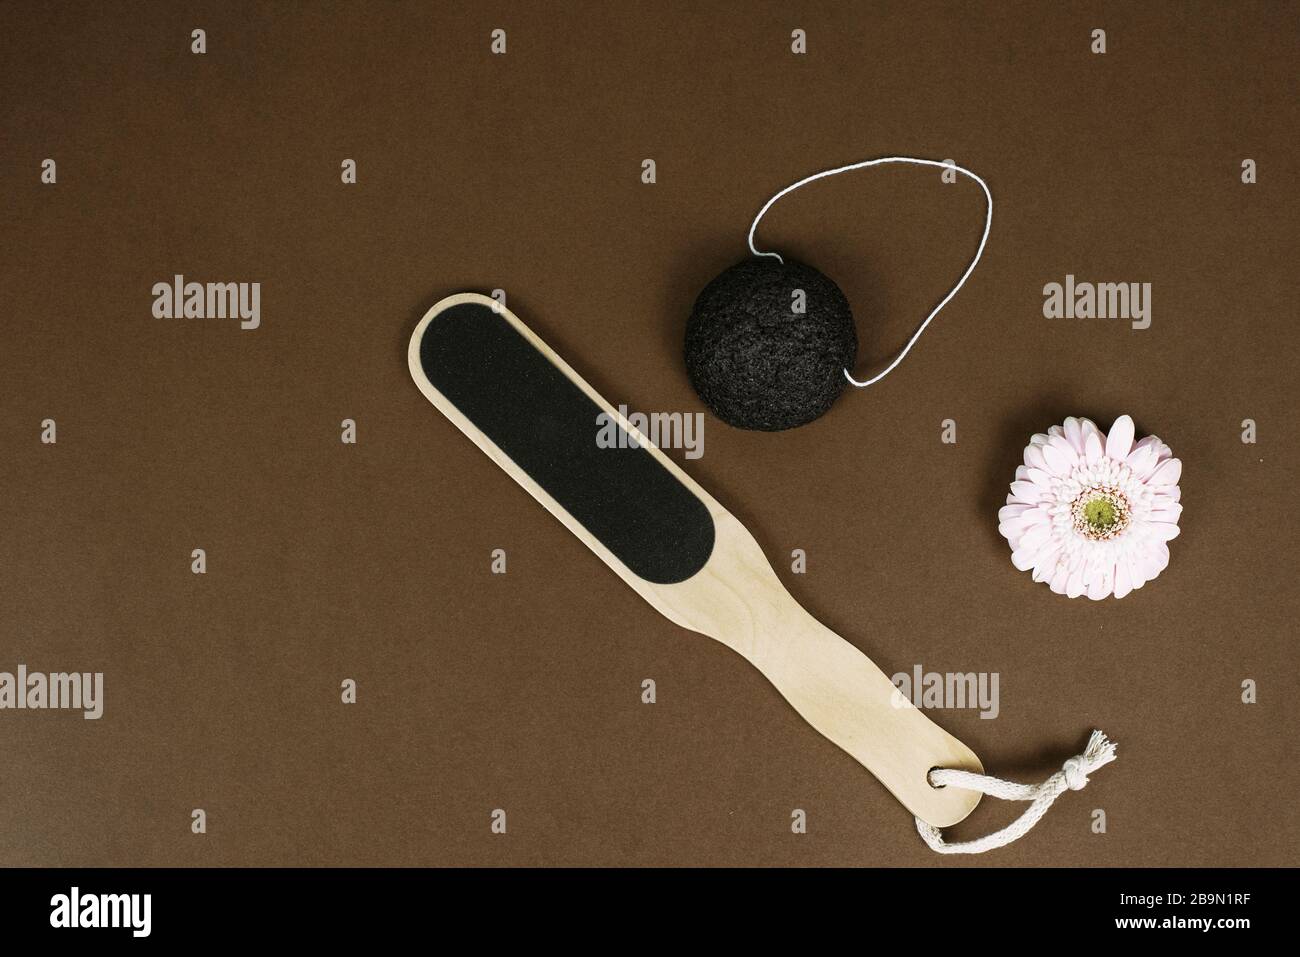 Different natural pumice for exfoliating the skin lies on a brown background next to the flower with copy space. The concept of moisturizing the skin of the feet with natural ingredients. Stock Photo